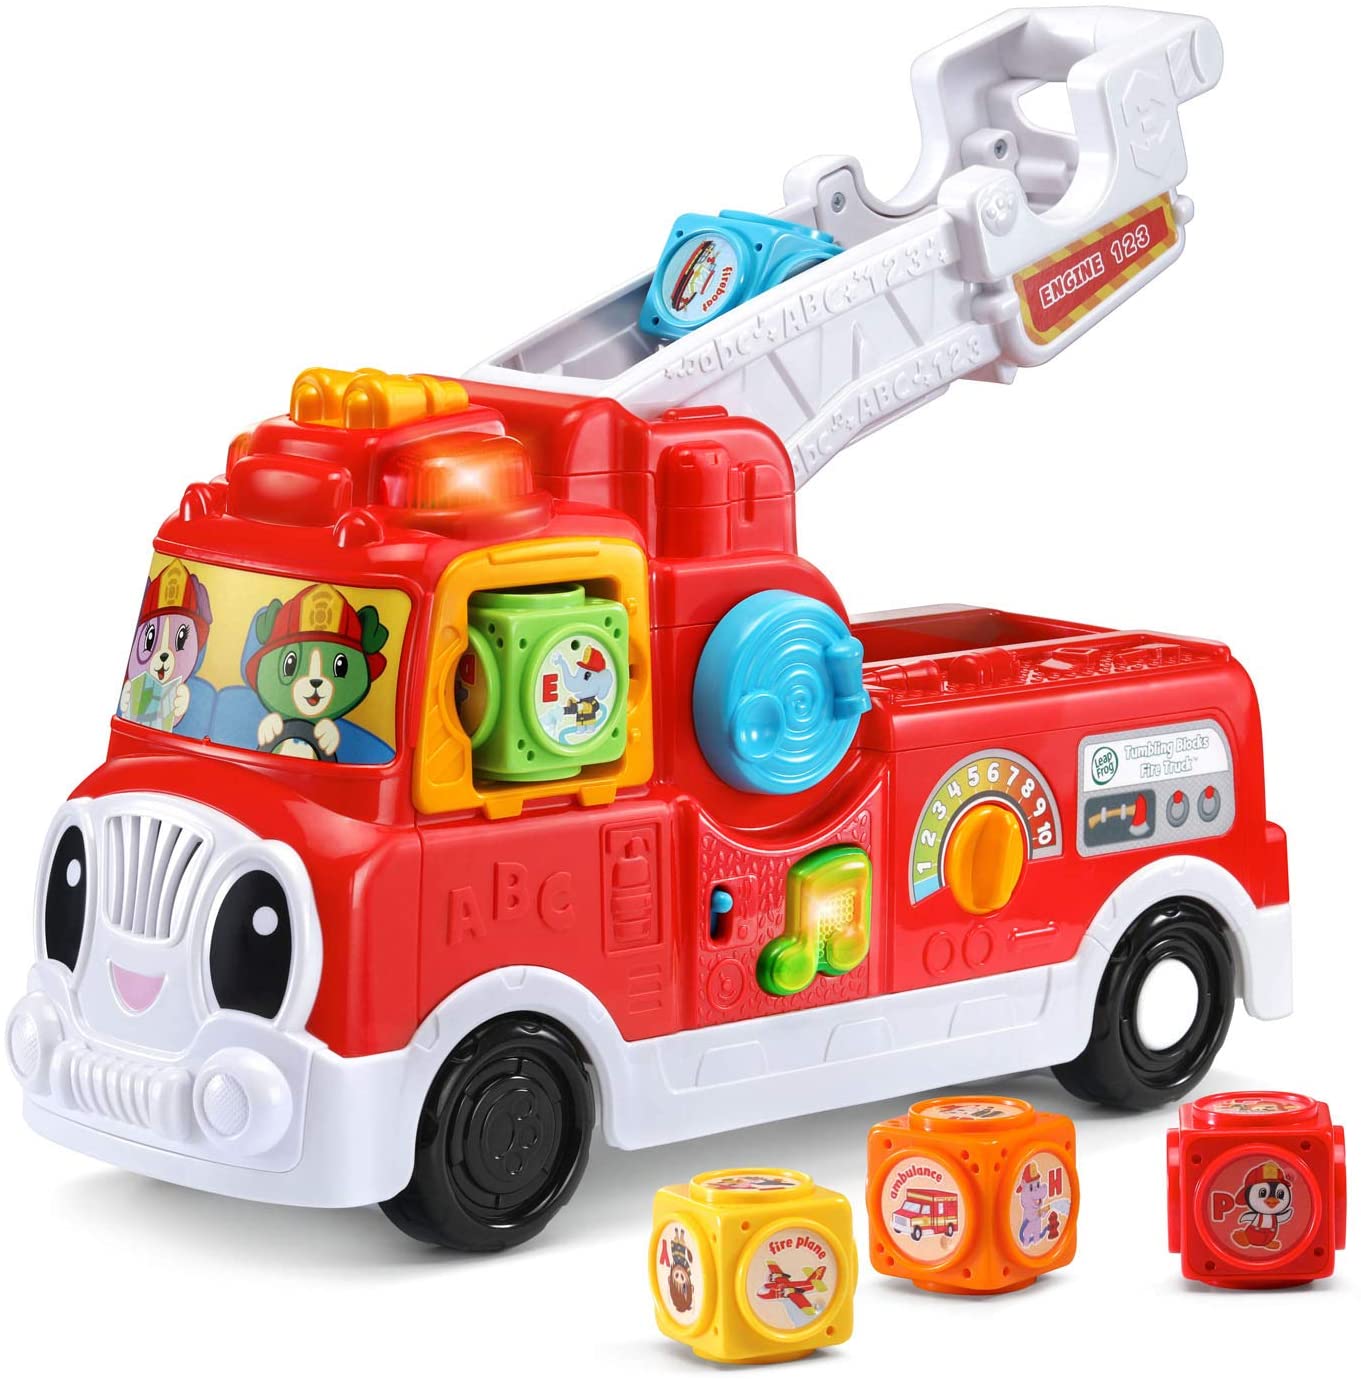 LeapFrog Educational Fire Truck For 2-Year-Old Boys